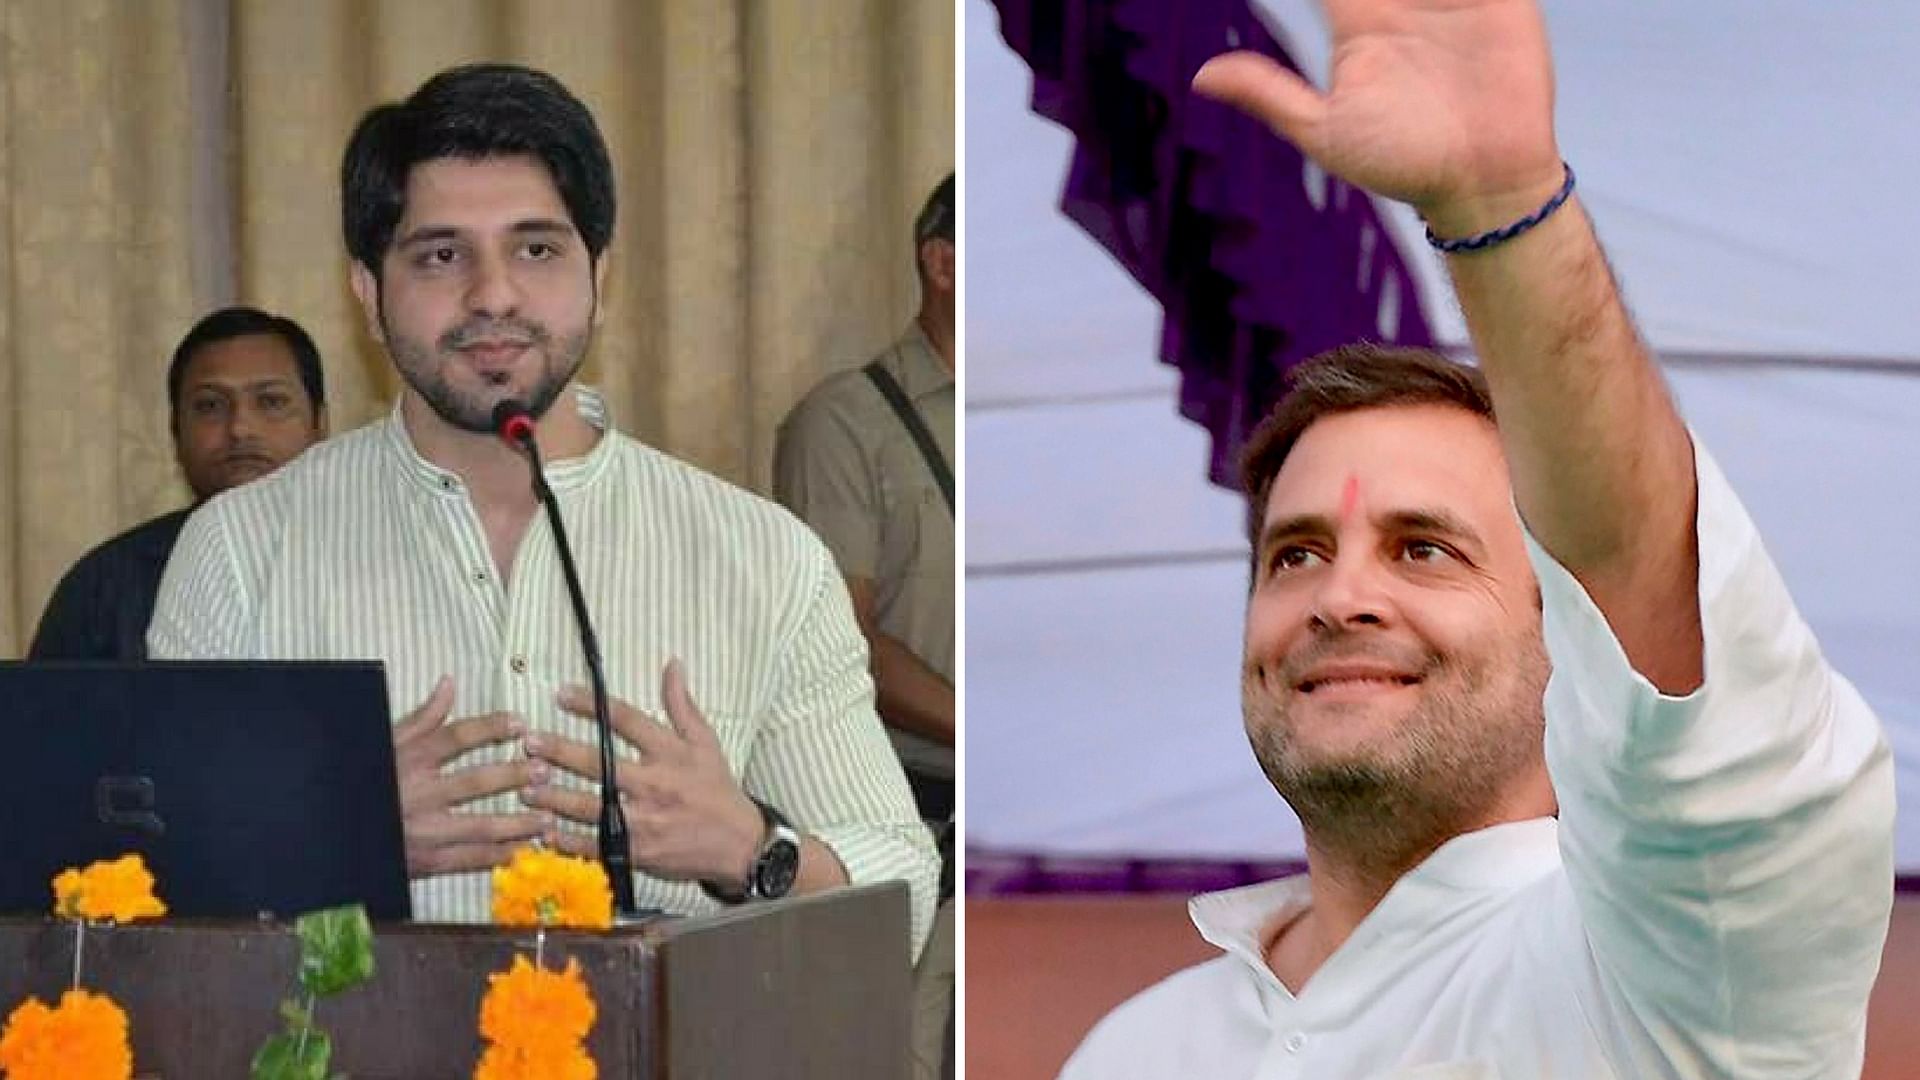 Shehzad asked Rahul to contest the poll based on merit rather than his surname, taking a dig at dynast politics.